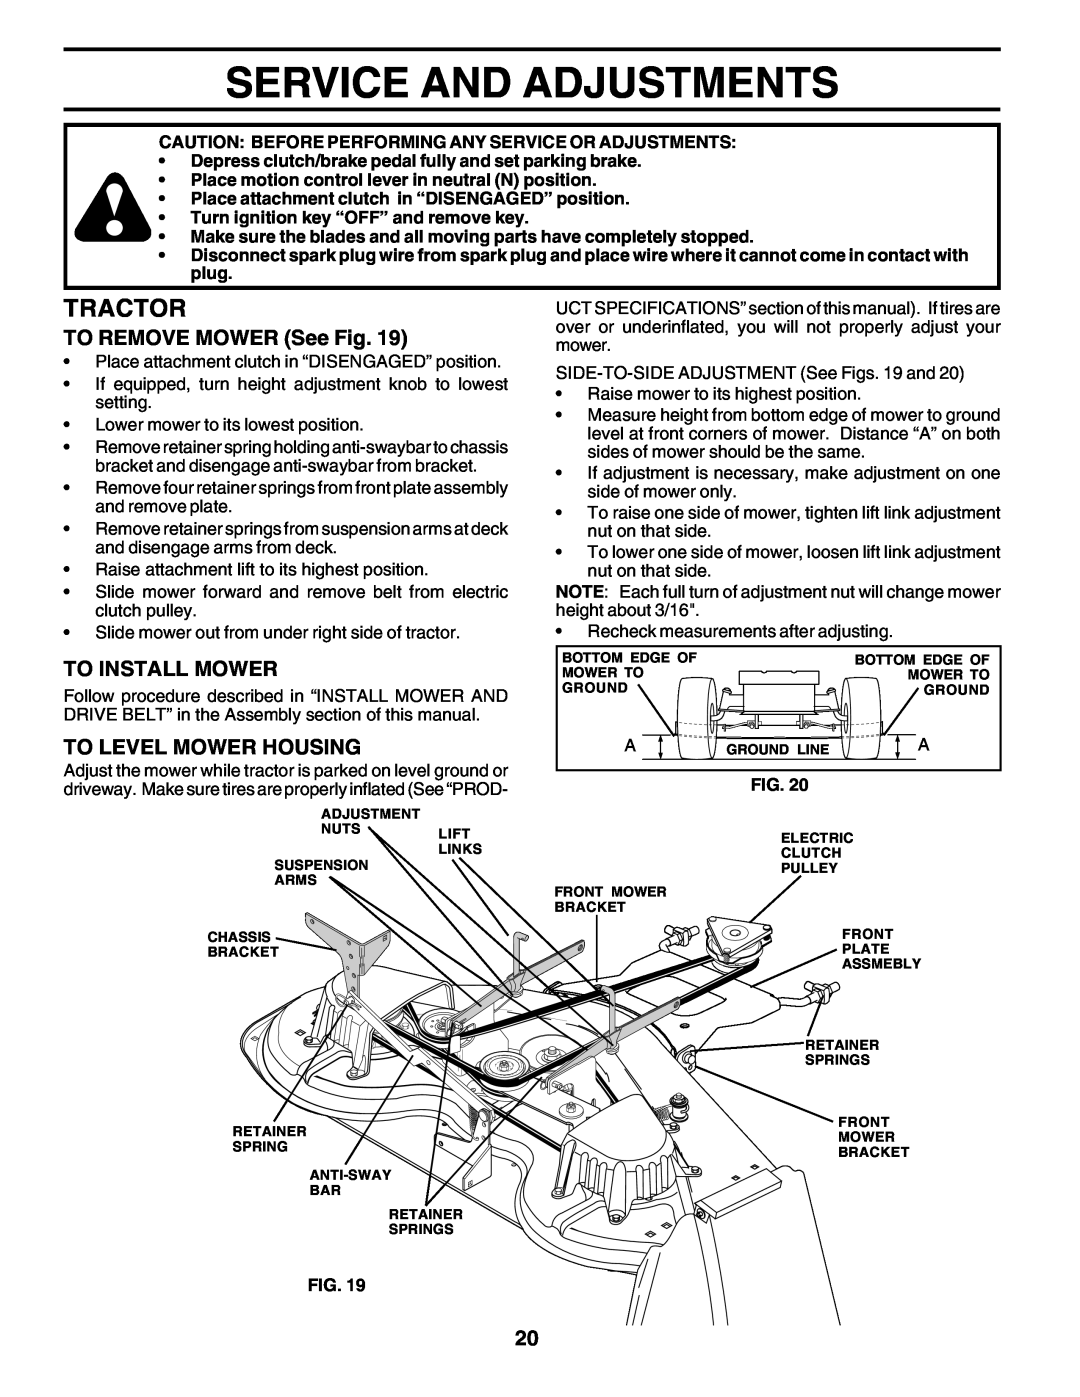 Poulan PRGT22H50C Service And Adjustments, Tractor, TO REMOVE MOWER See Fig, To Install Mower, To Level Mower Housing 